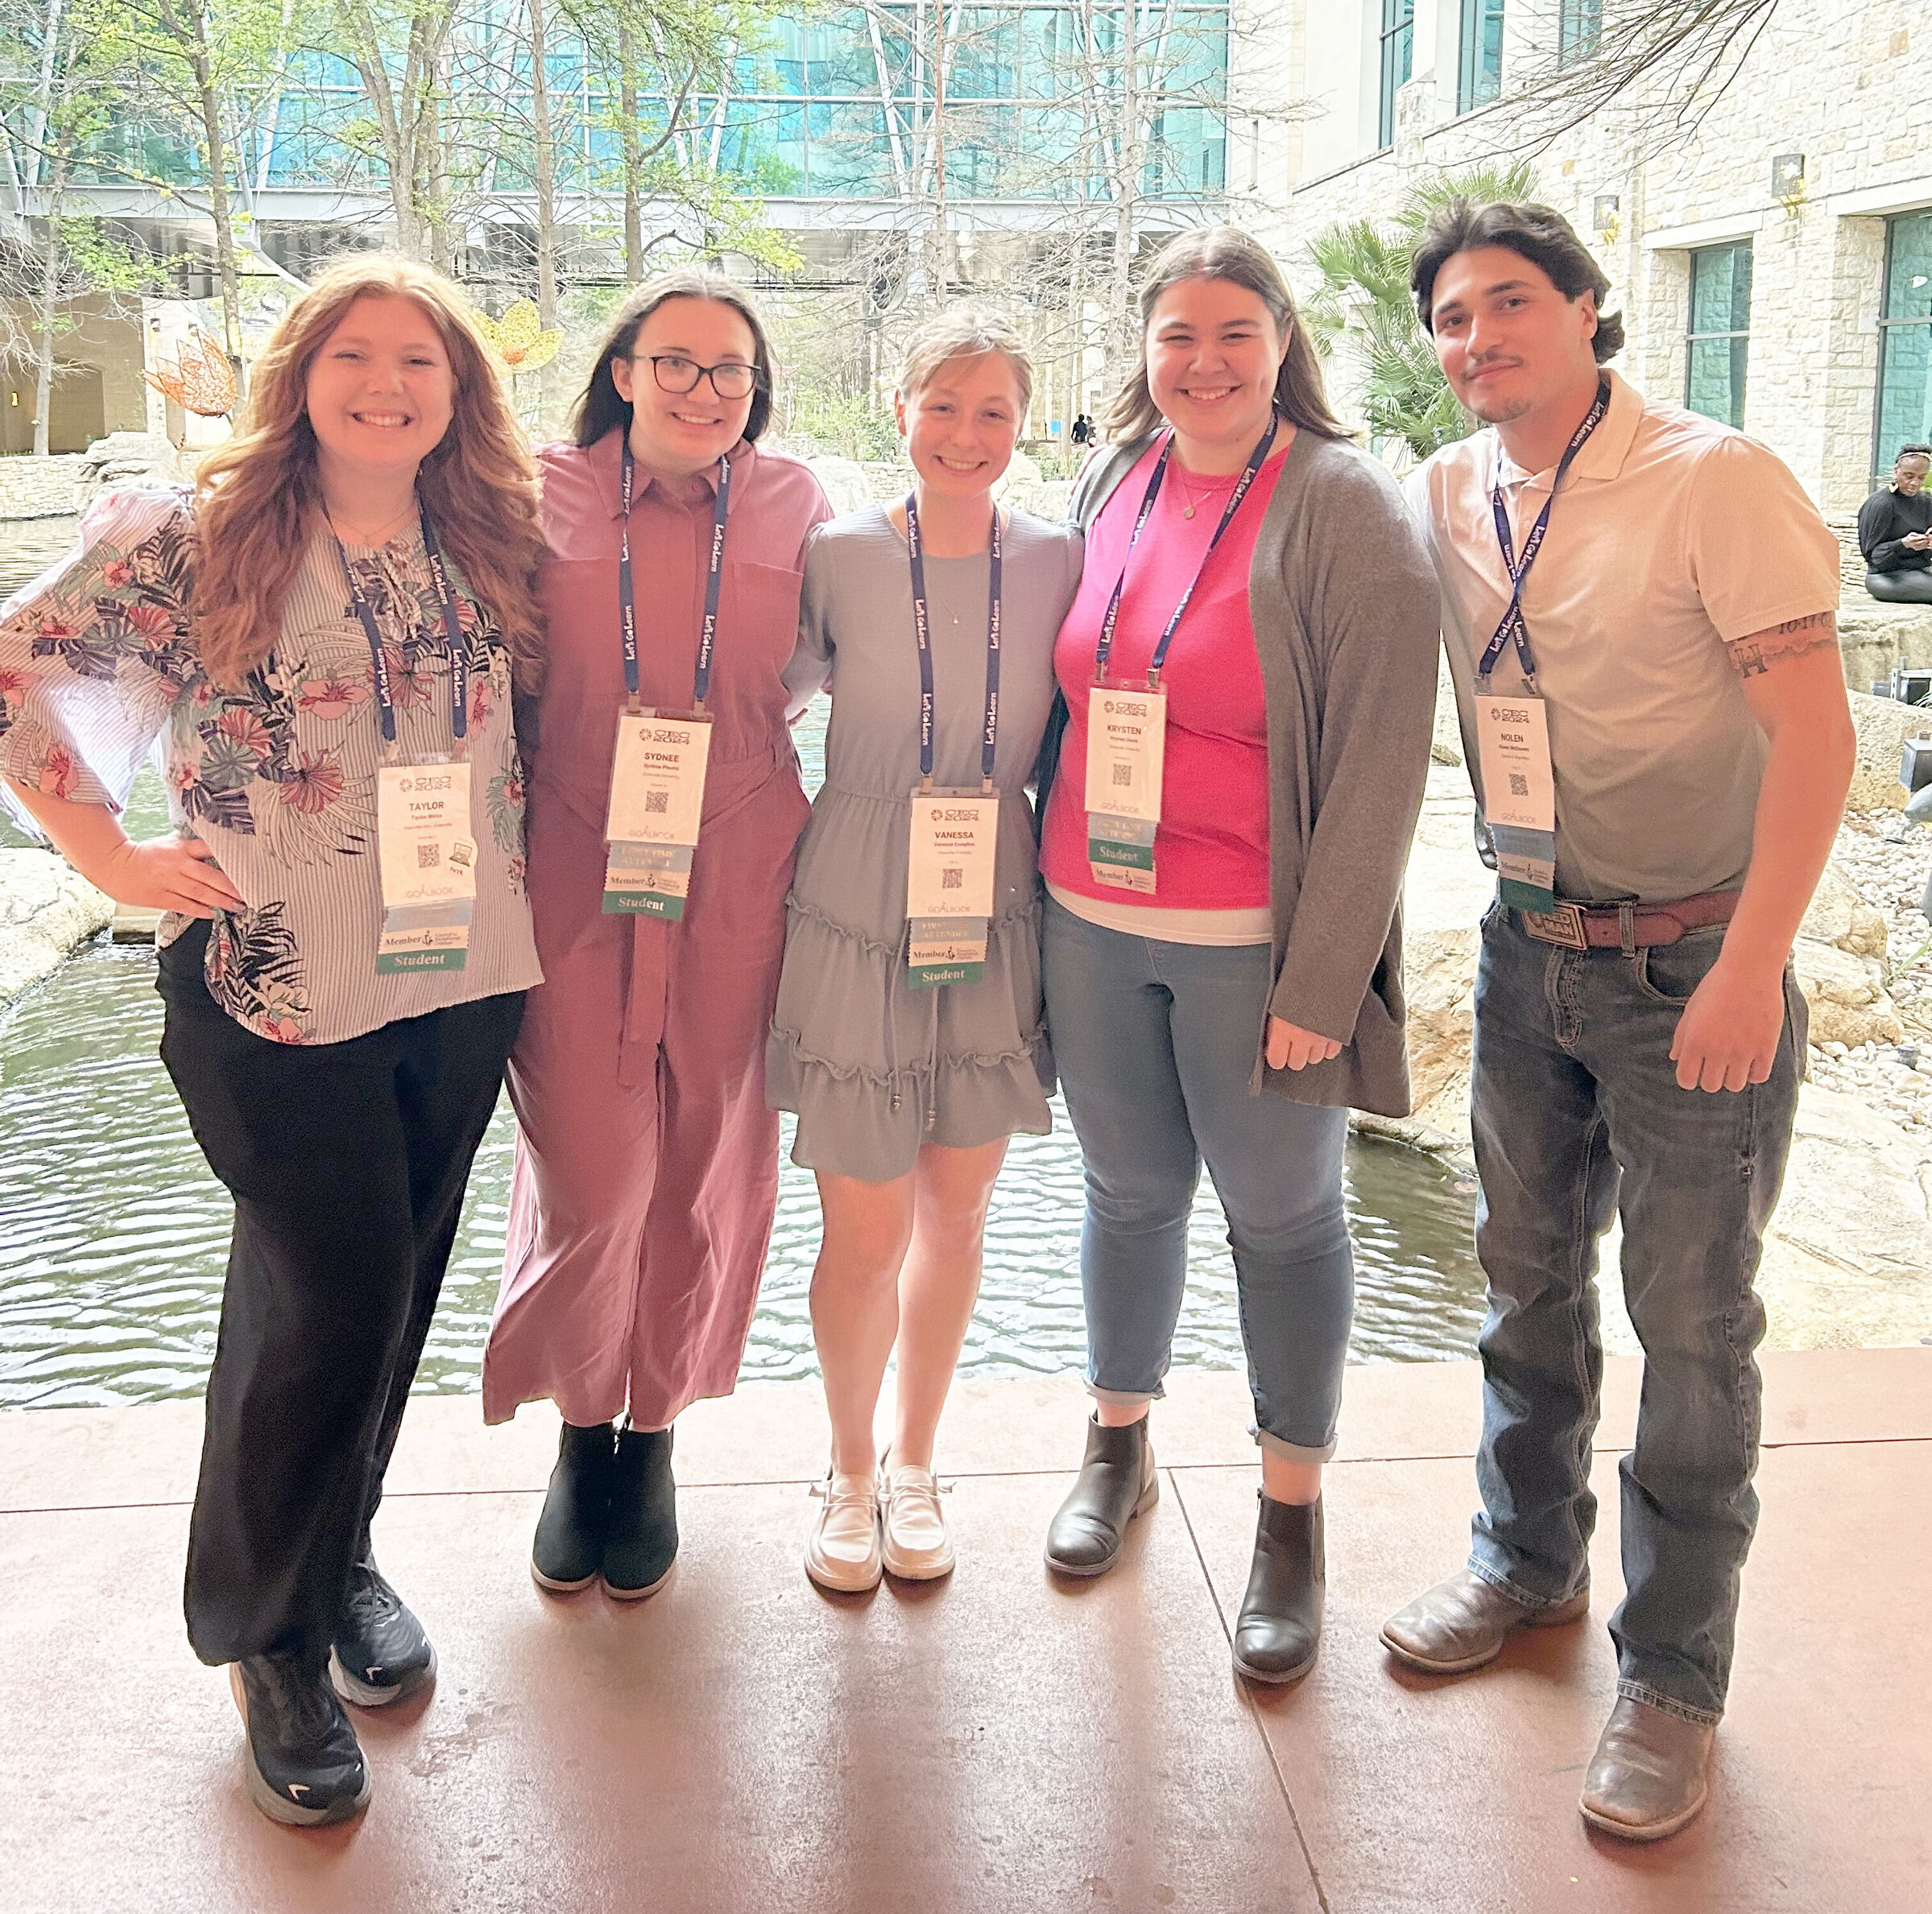 GU students gain knowledge, contacts at national conference